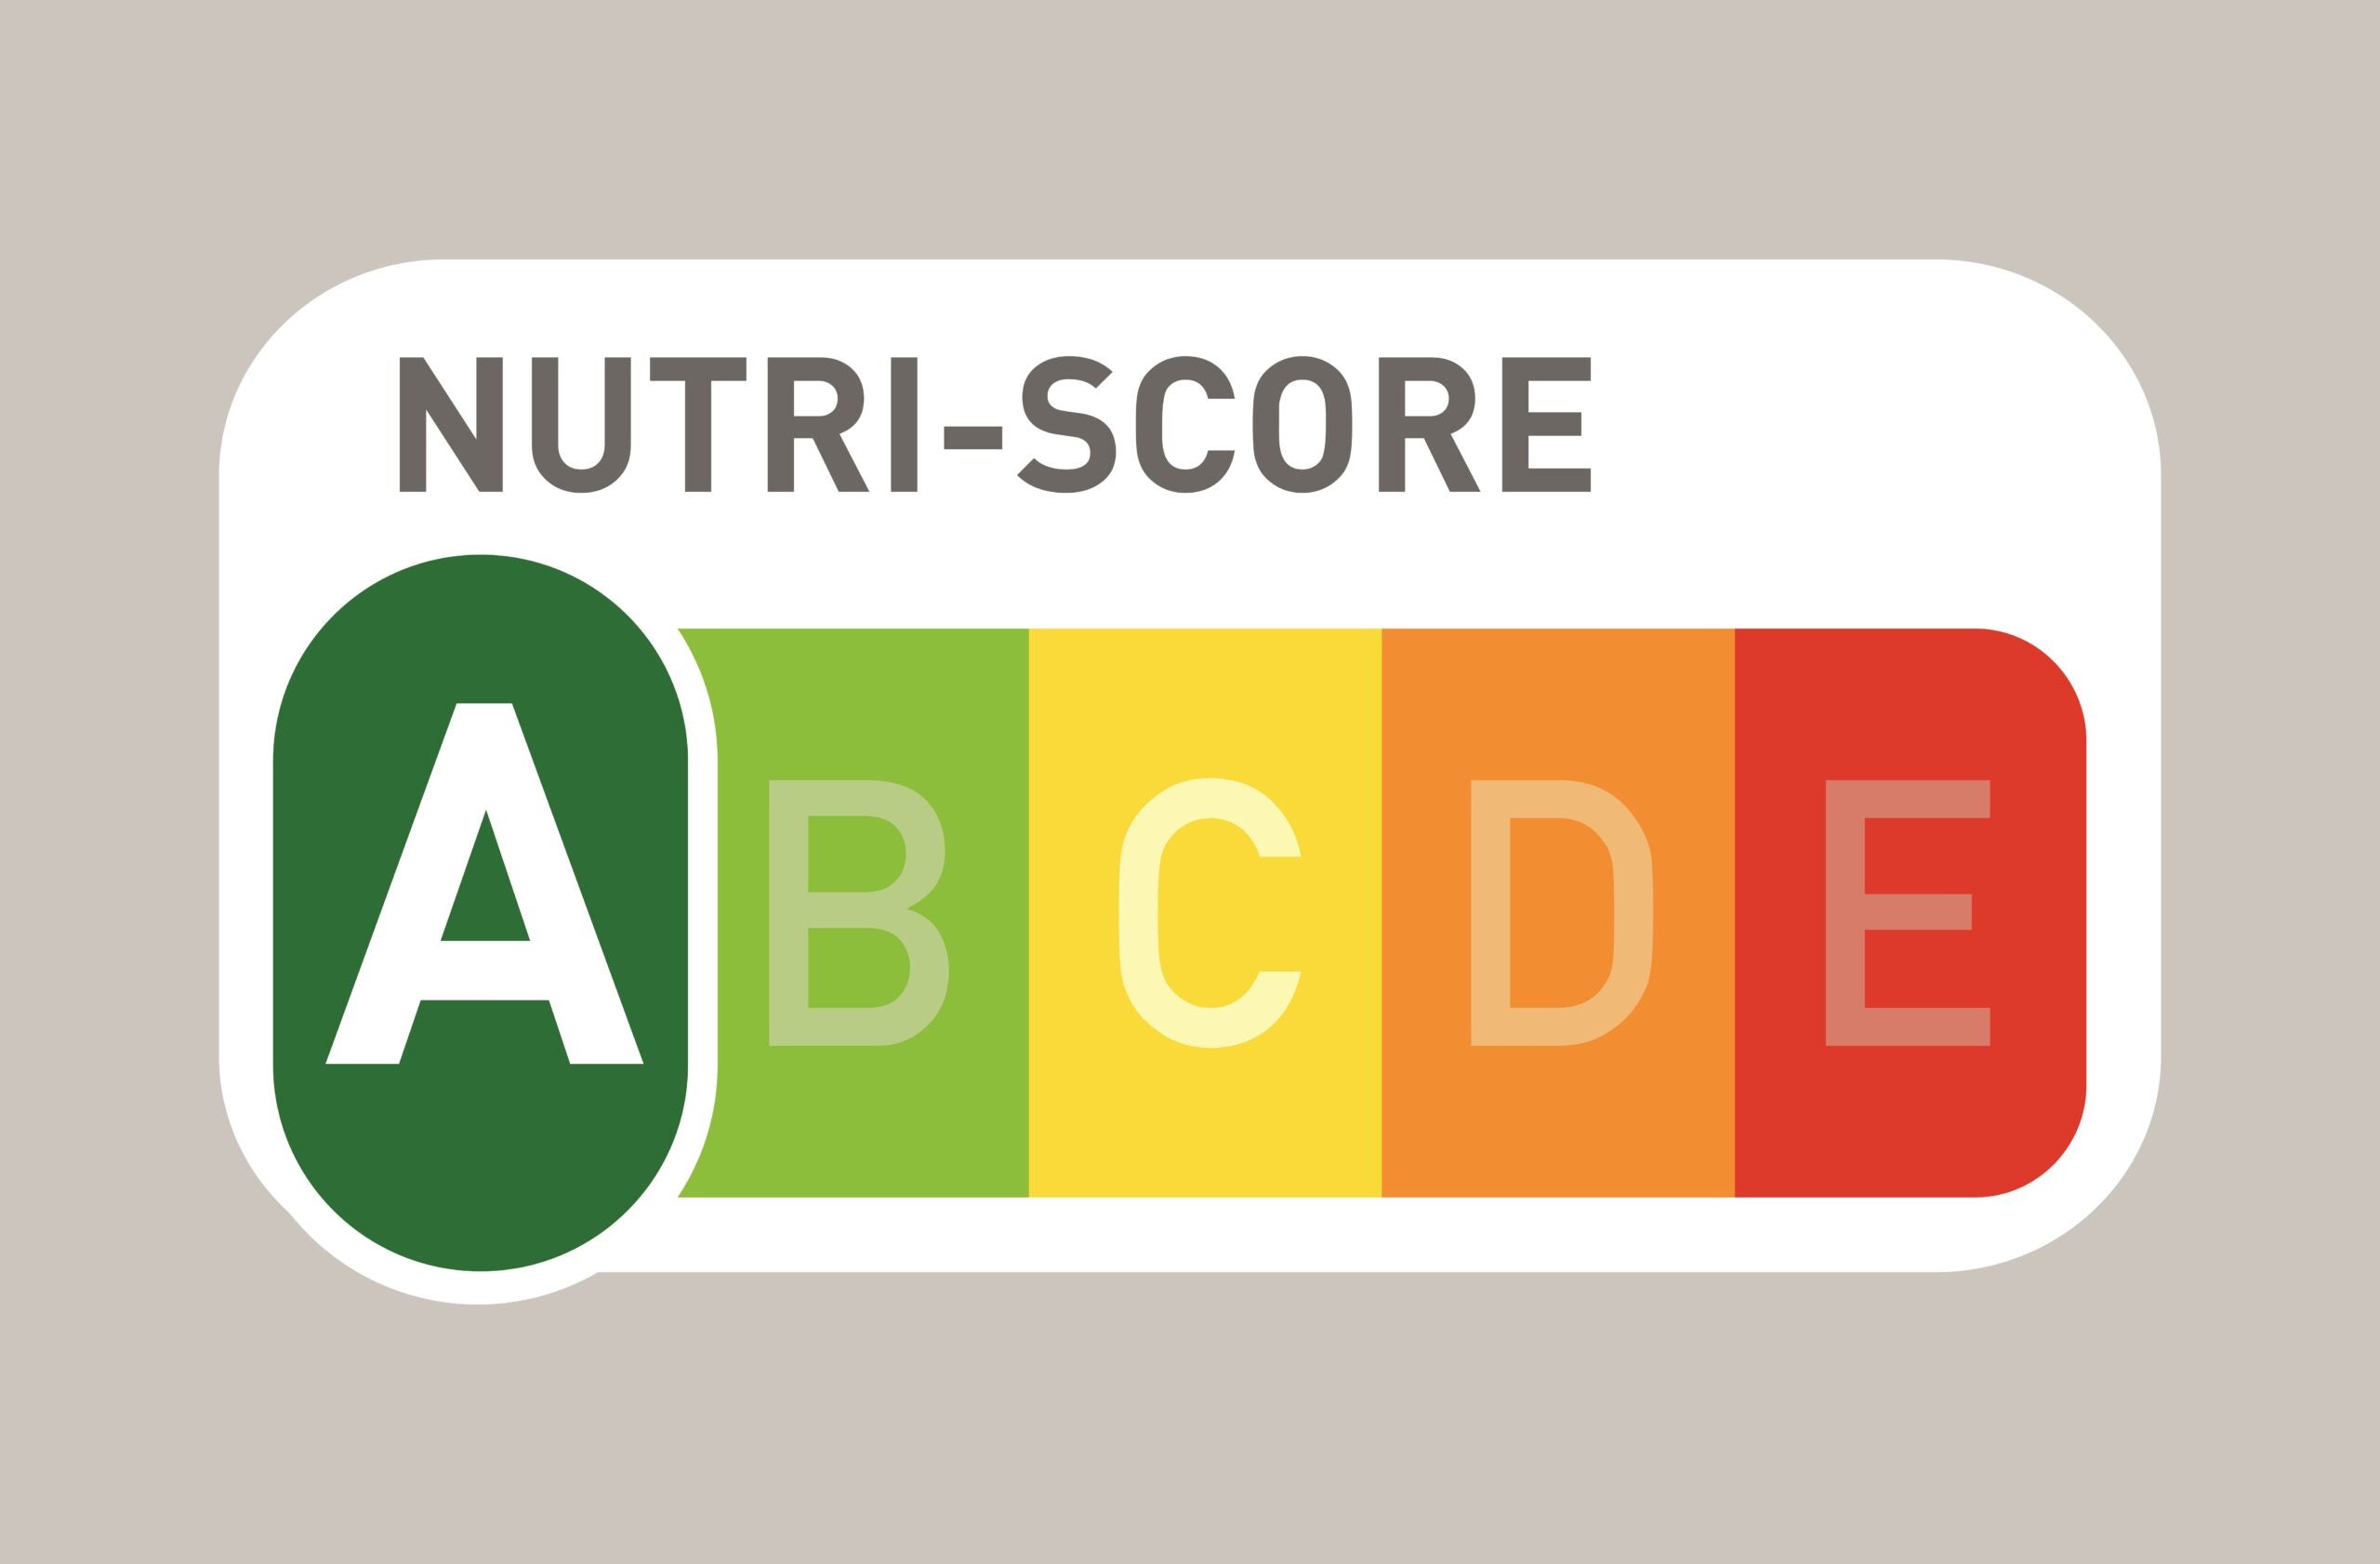 Changes lined up for Nutri-Score labelling scheme